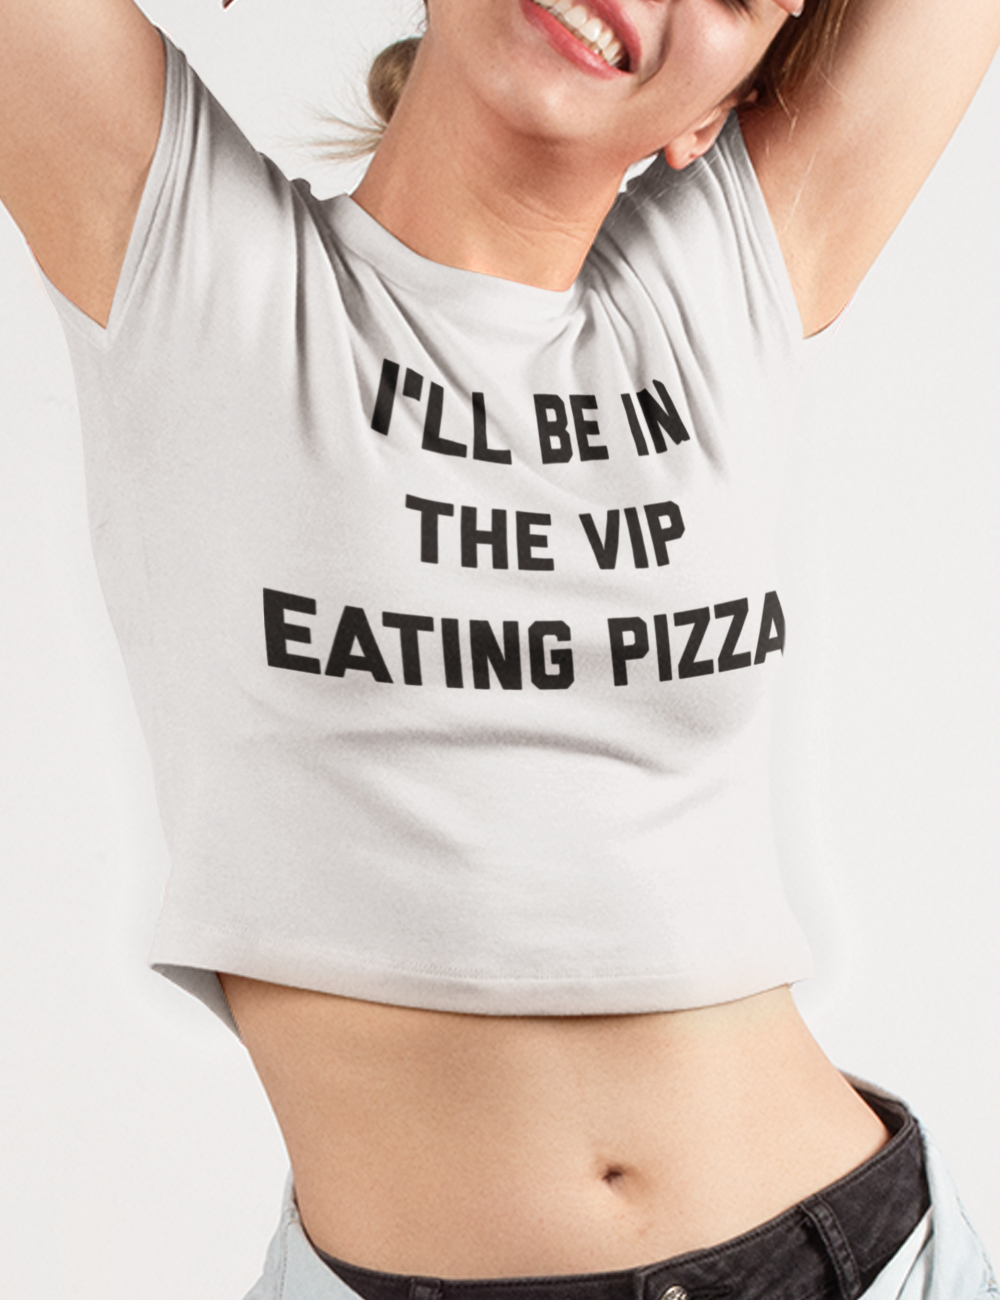 I'll Be In The VIP Eating Pizza Crop Top T-Shirt OniTakai